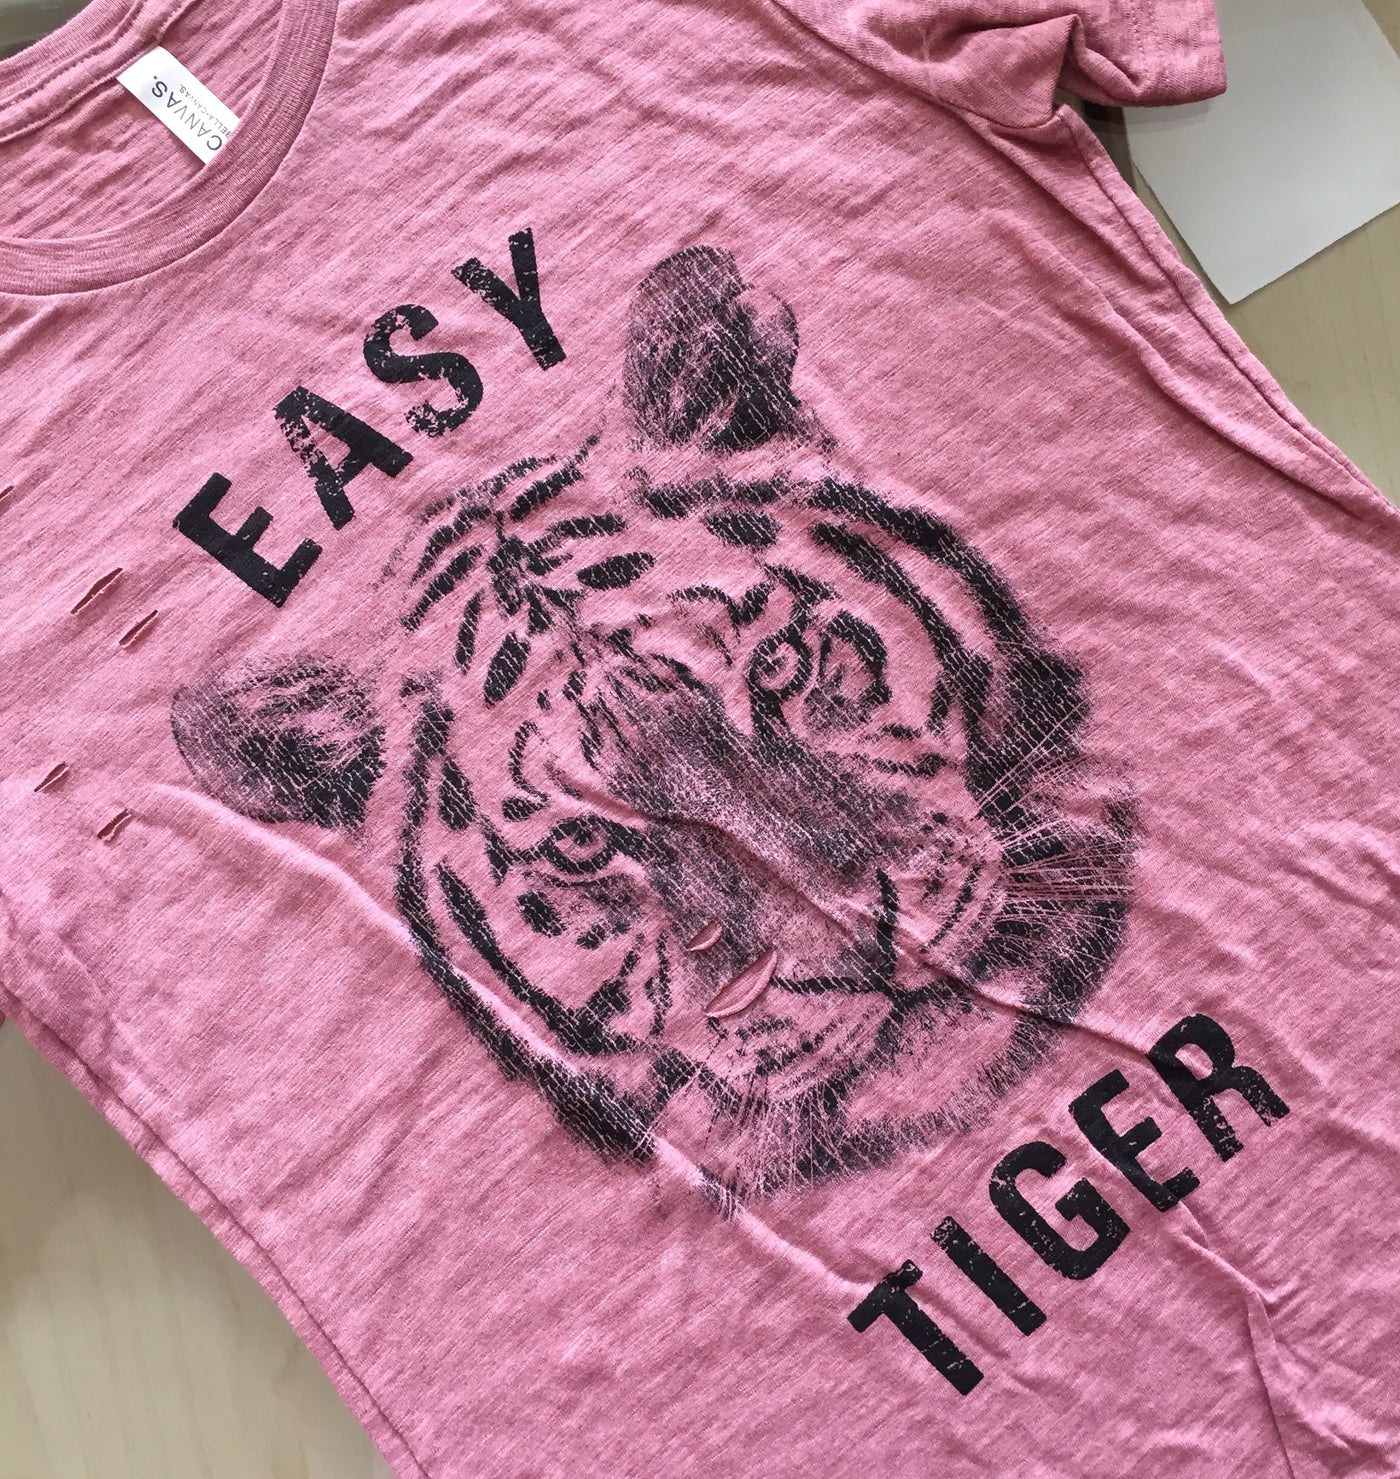 Easy Tiger Laser Cut Tee-T-shirt-Style Trolley